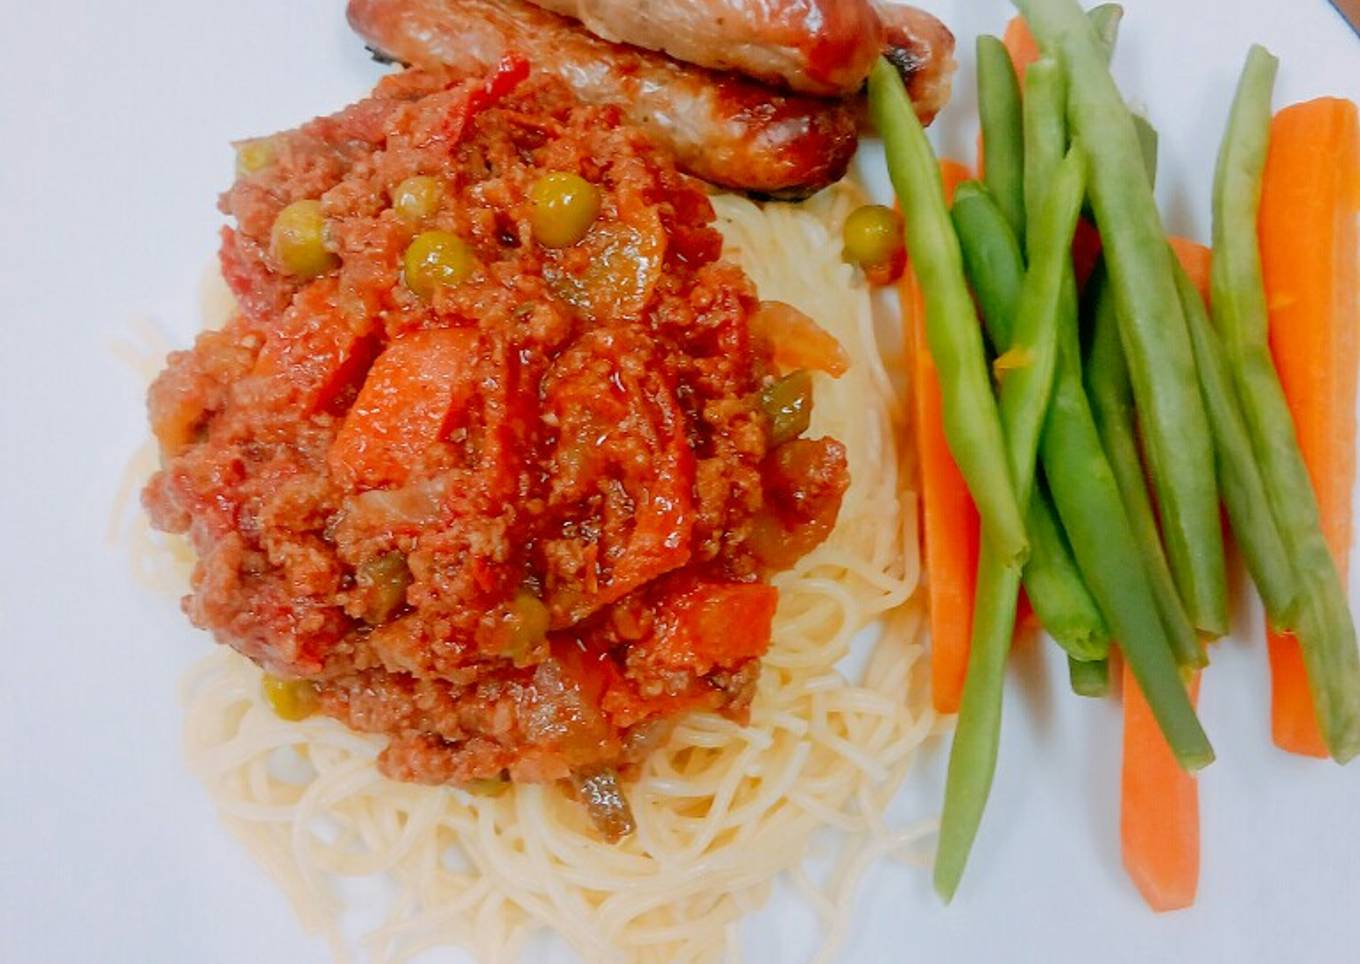 Spaghetti bolognese with sausages - Abujamoms